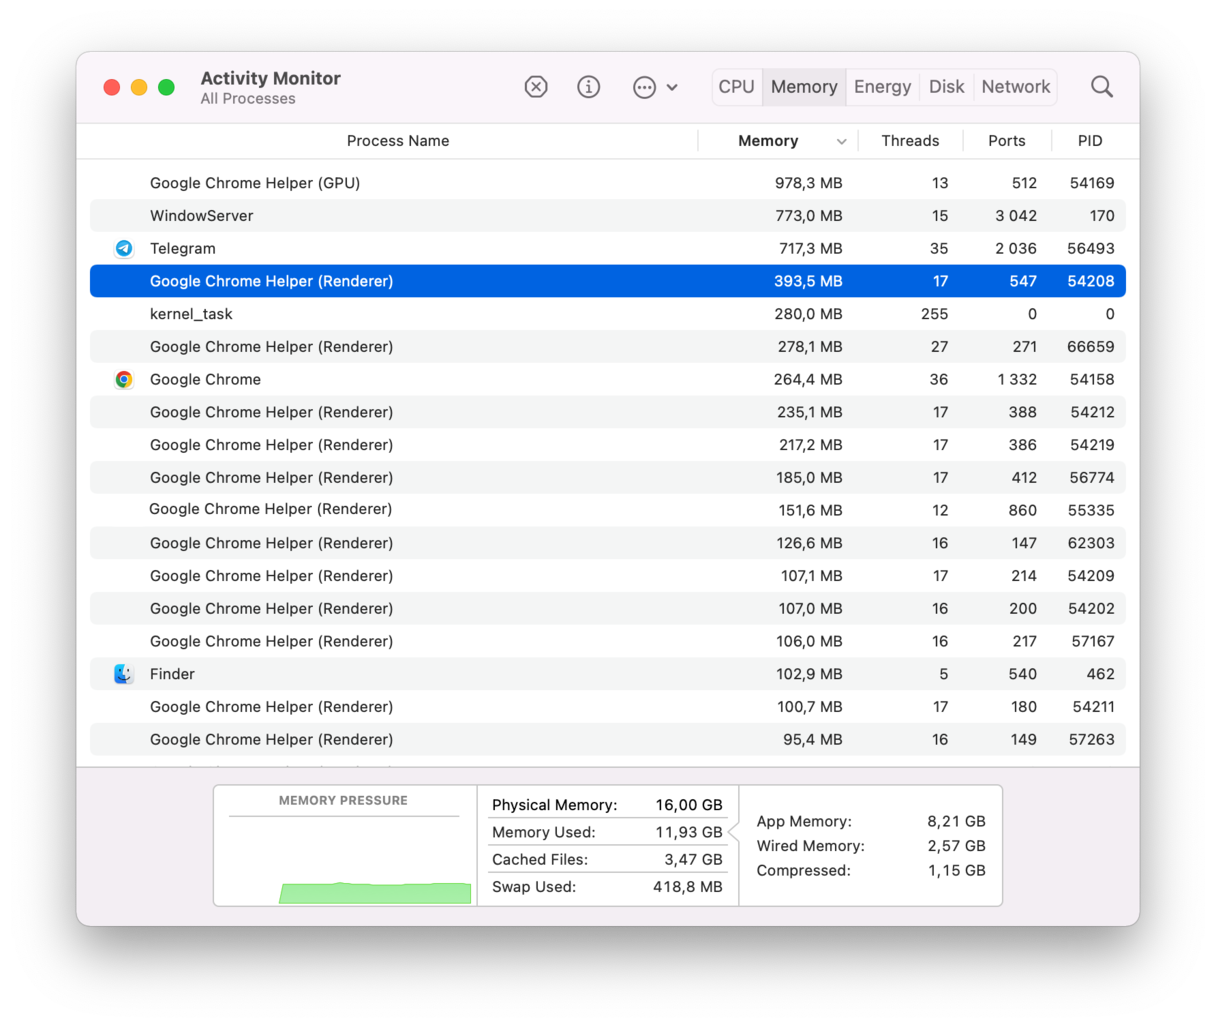 What Is Google Chrome Helper, and Why Is It Hogging My CPU Cycles?